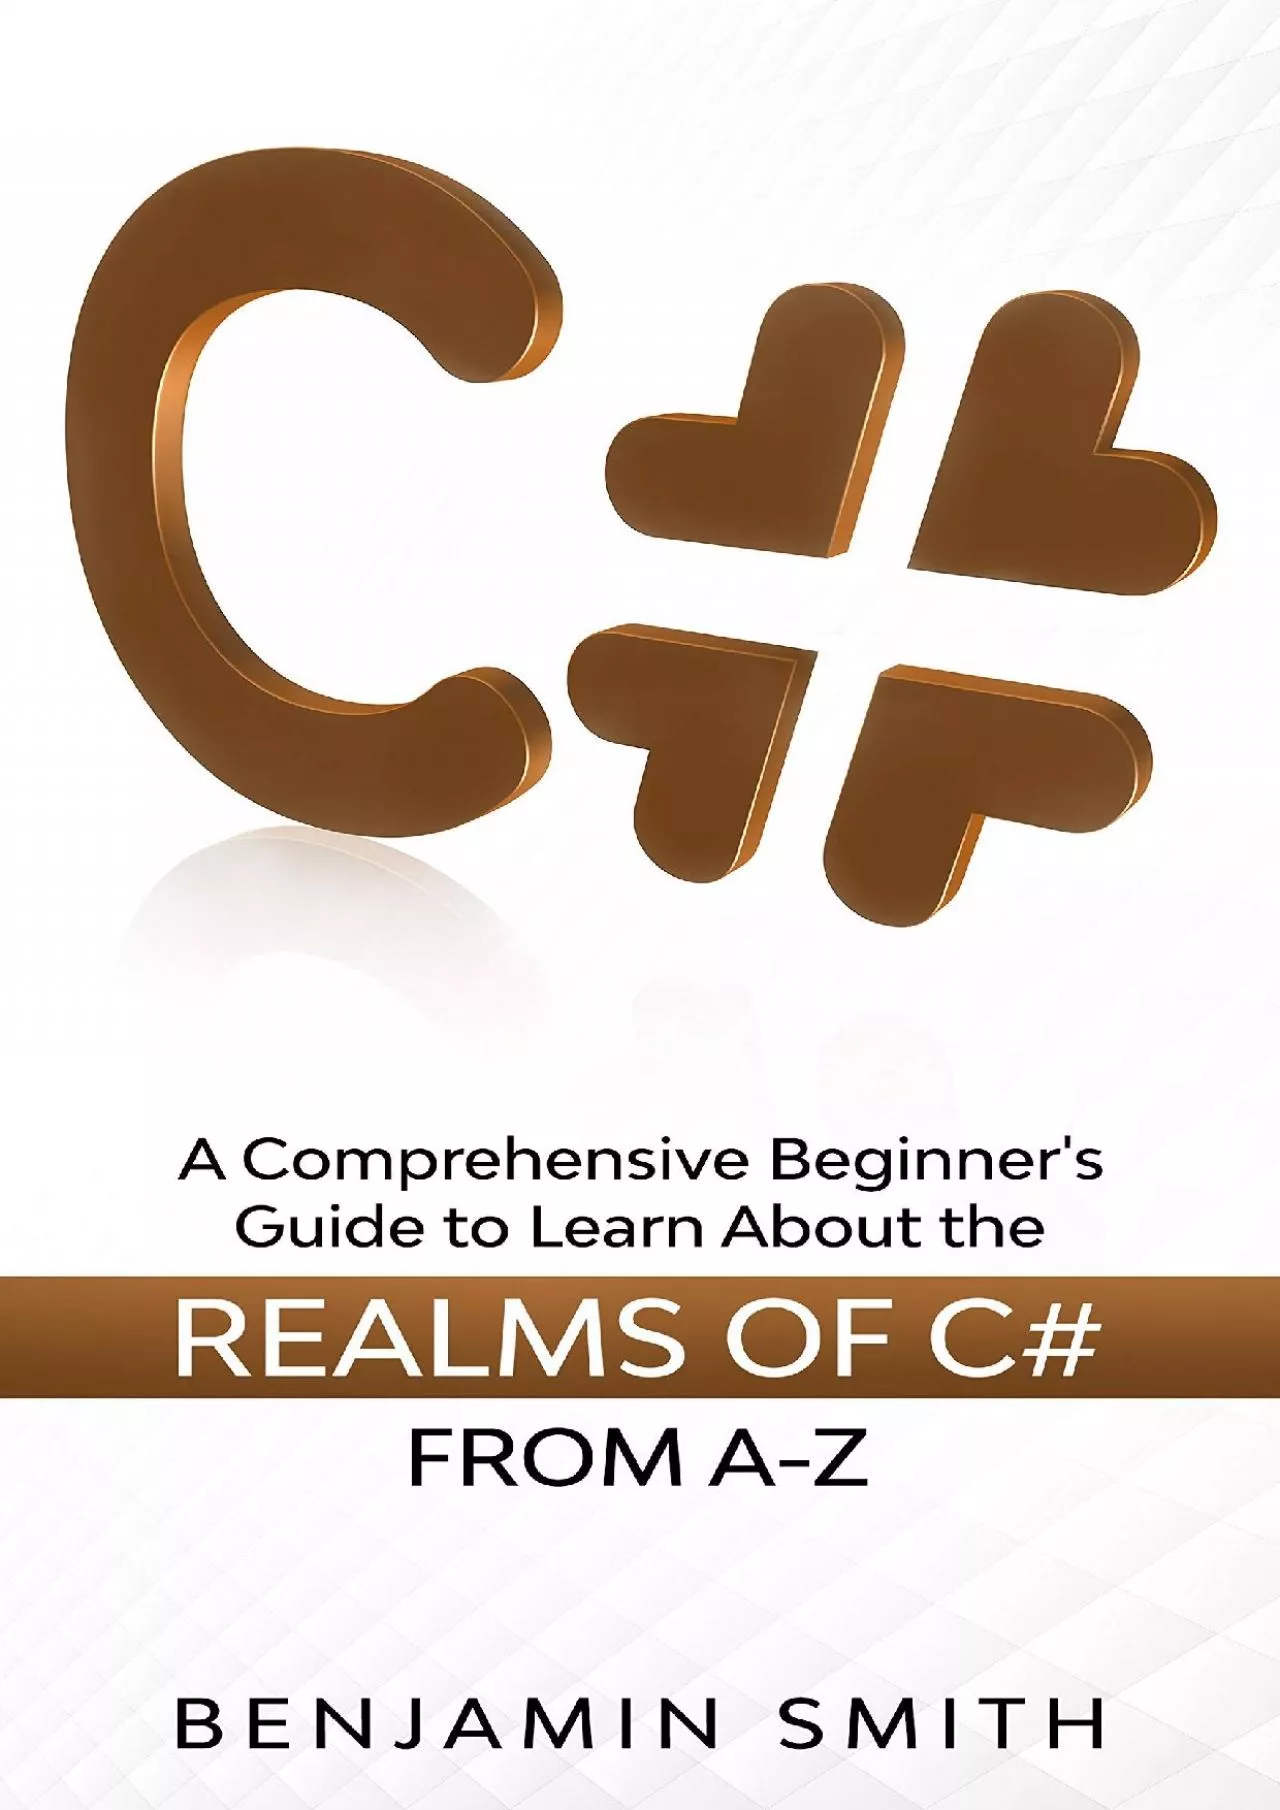 [READING BOOK]-C: A Comprehensive Beginner\'s Guide to Learn About the Realms of C From